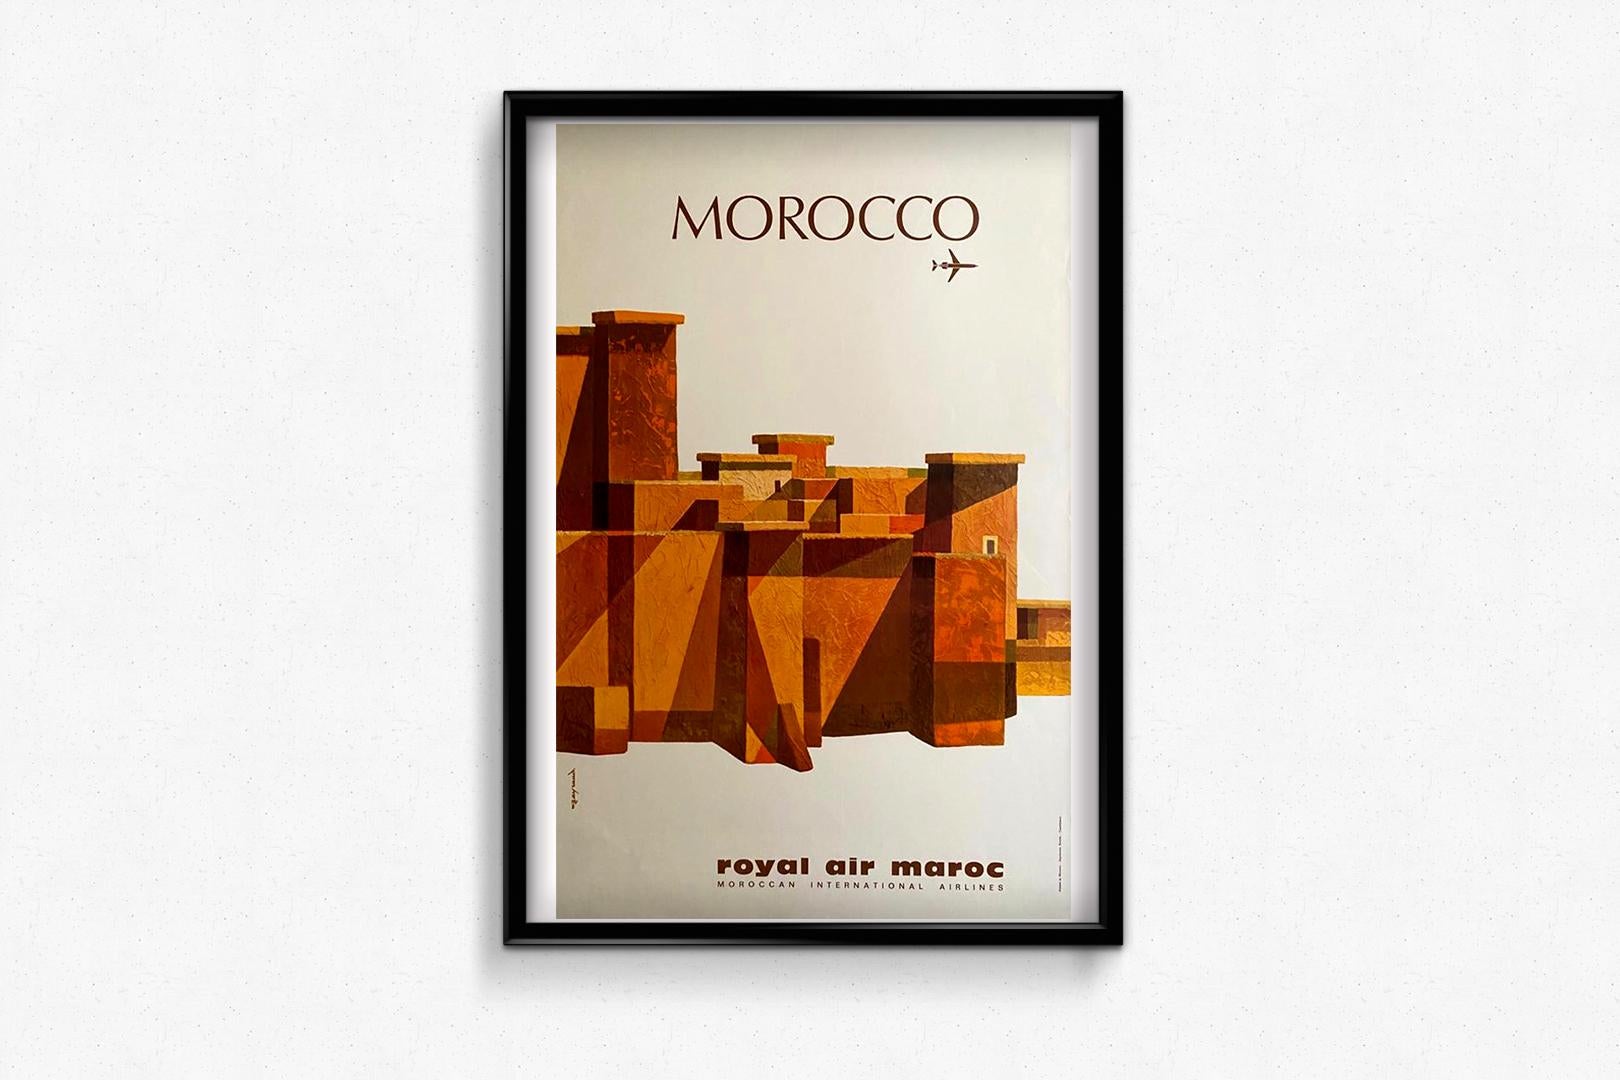 A very nice travel poster commissioned from Gayraud around the 1960s by Royal Air Maroc to promote travel to its lands.

Royal Air Maroc is a Moroccan airline founded in 1957. Its main hub is located at Mohammed-V airport in Casablanca. It serves